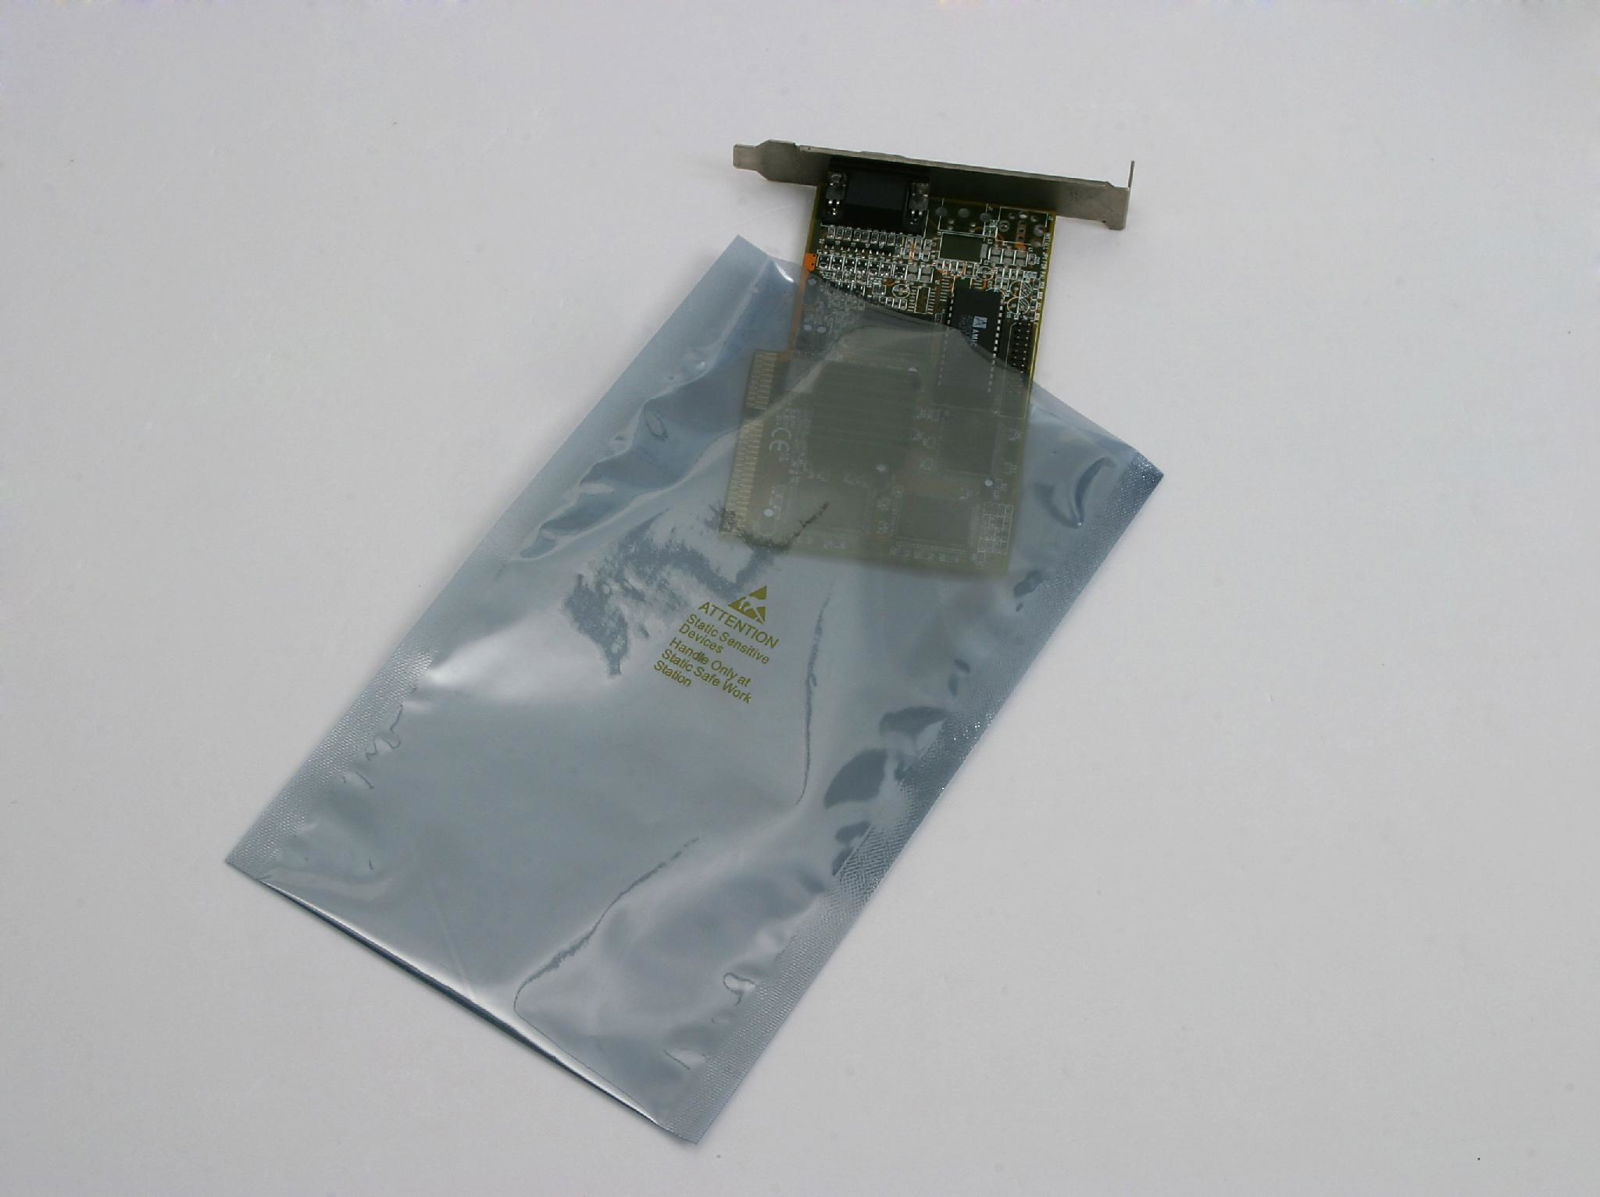 Antistatic Bag for Electronic Items 3